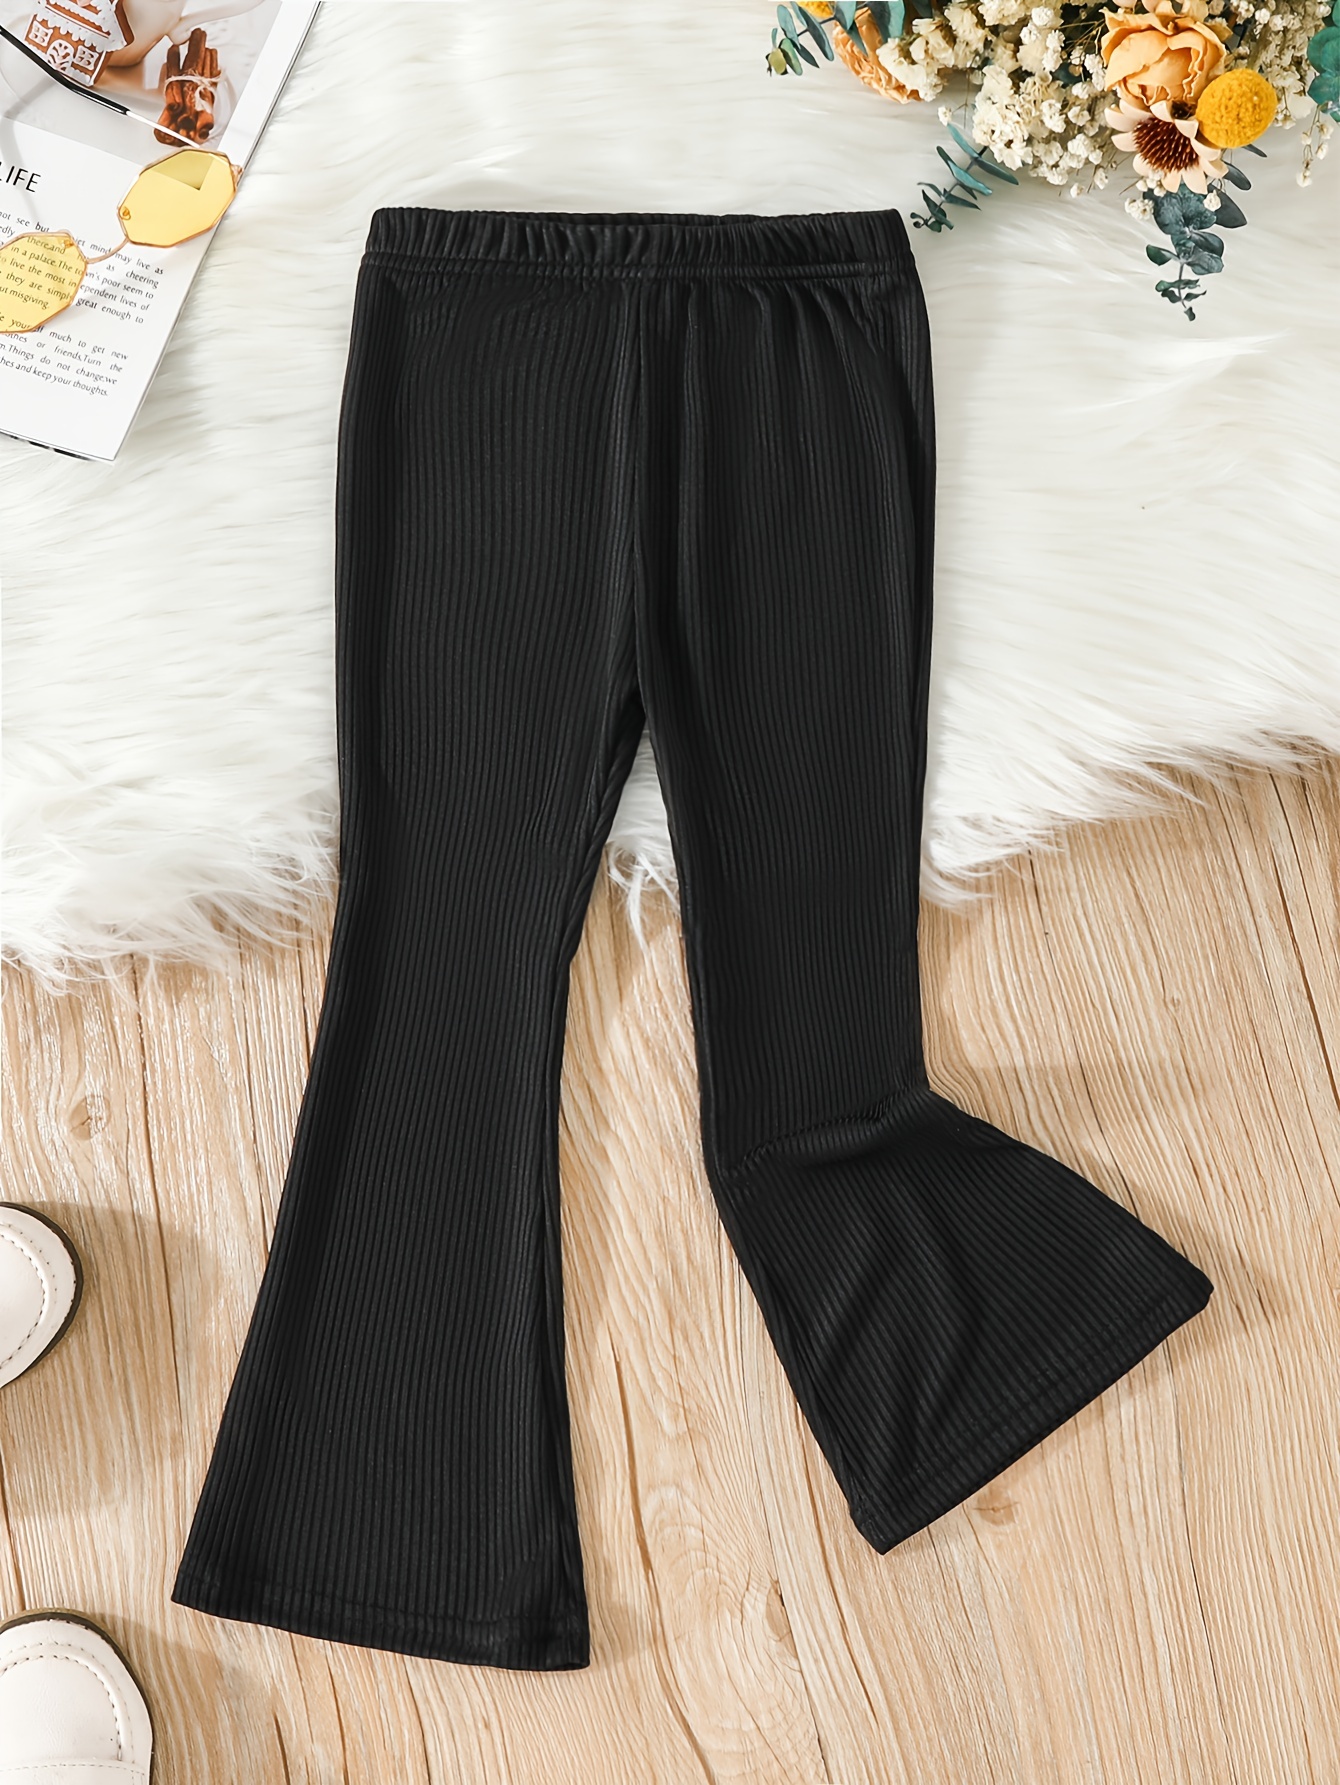 Stylish Slim-Fit High-Waisted Personality Flared Pants Autumn And